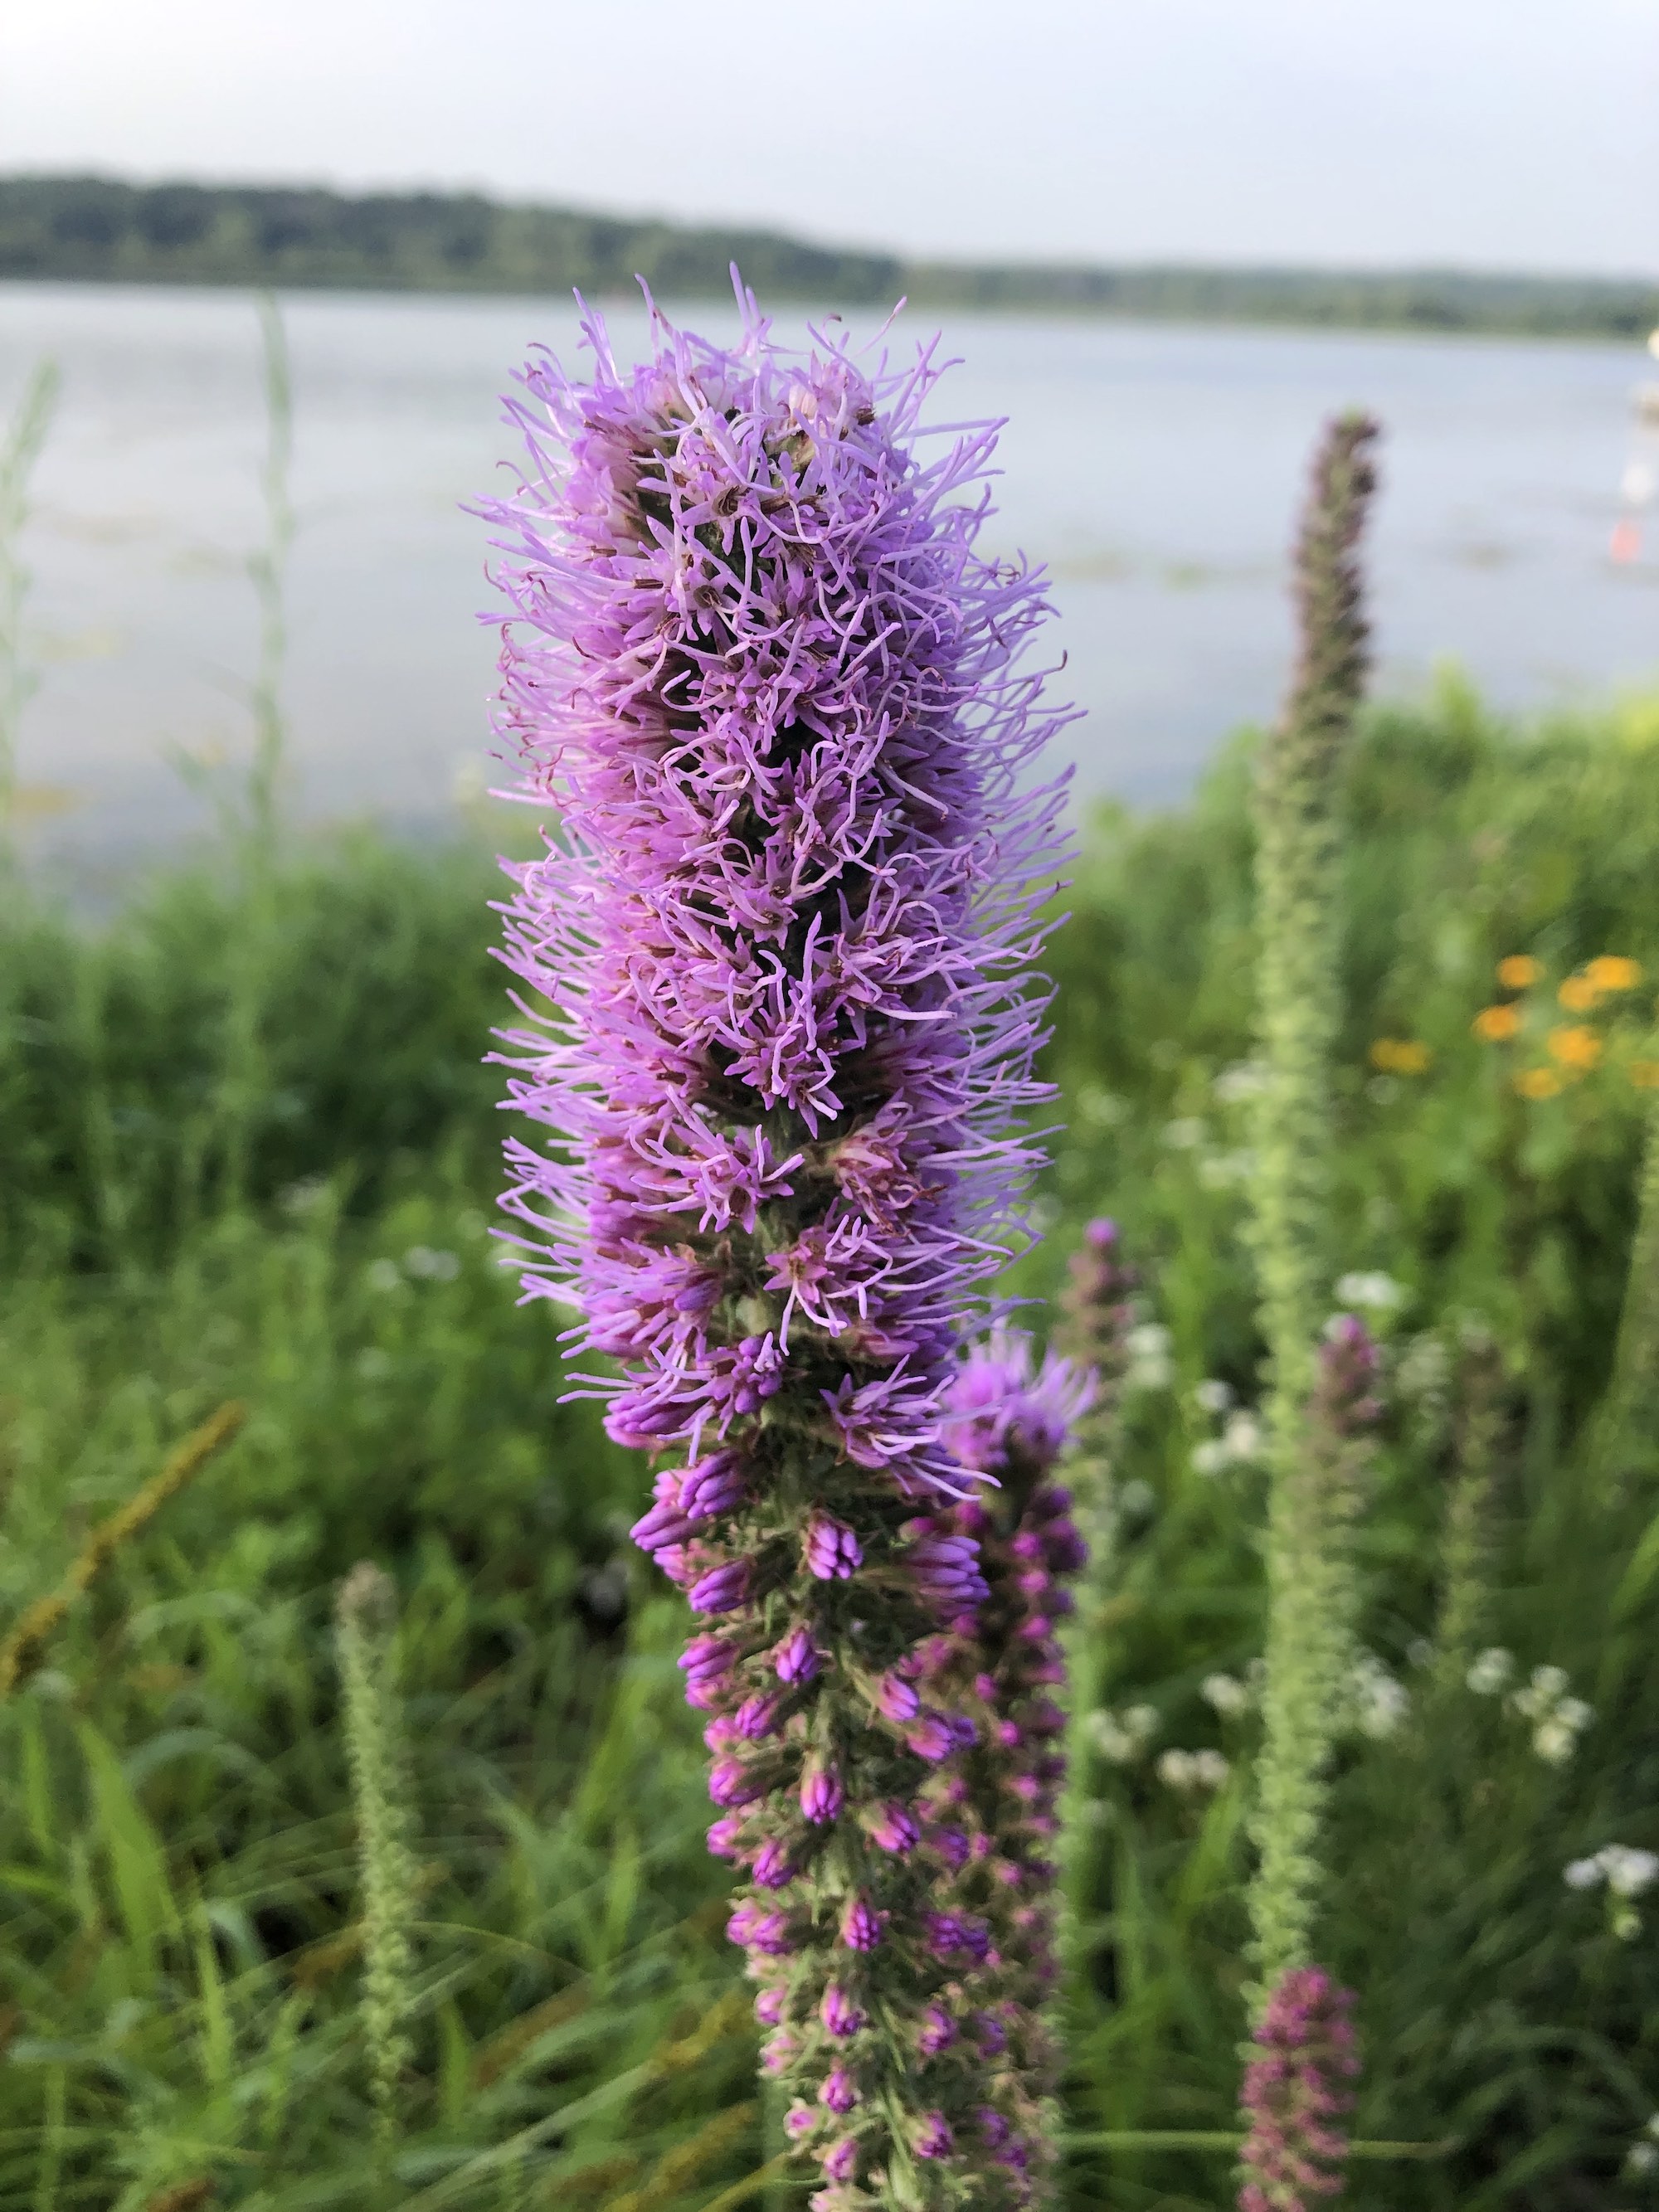 Dense Blazing Star on the shore of Lake Wingra in Wingra Park in Madison, Wisconsin on July 16, 2021.